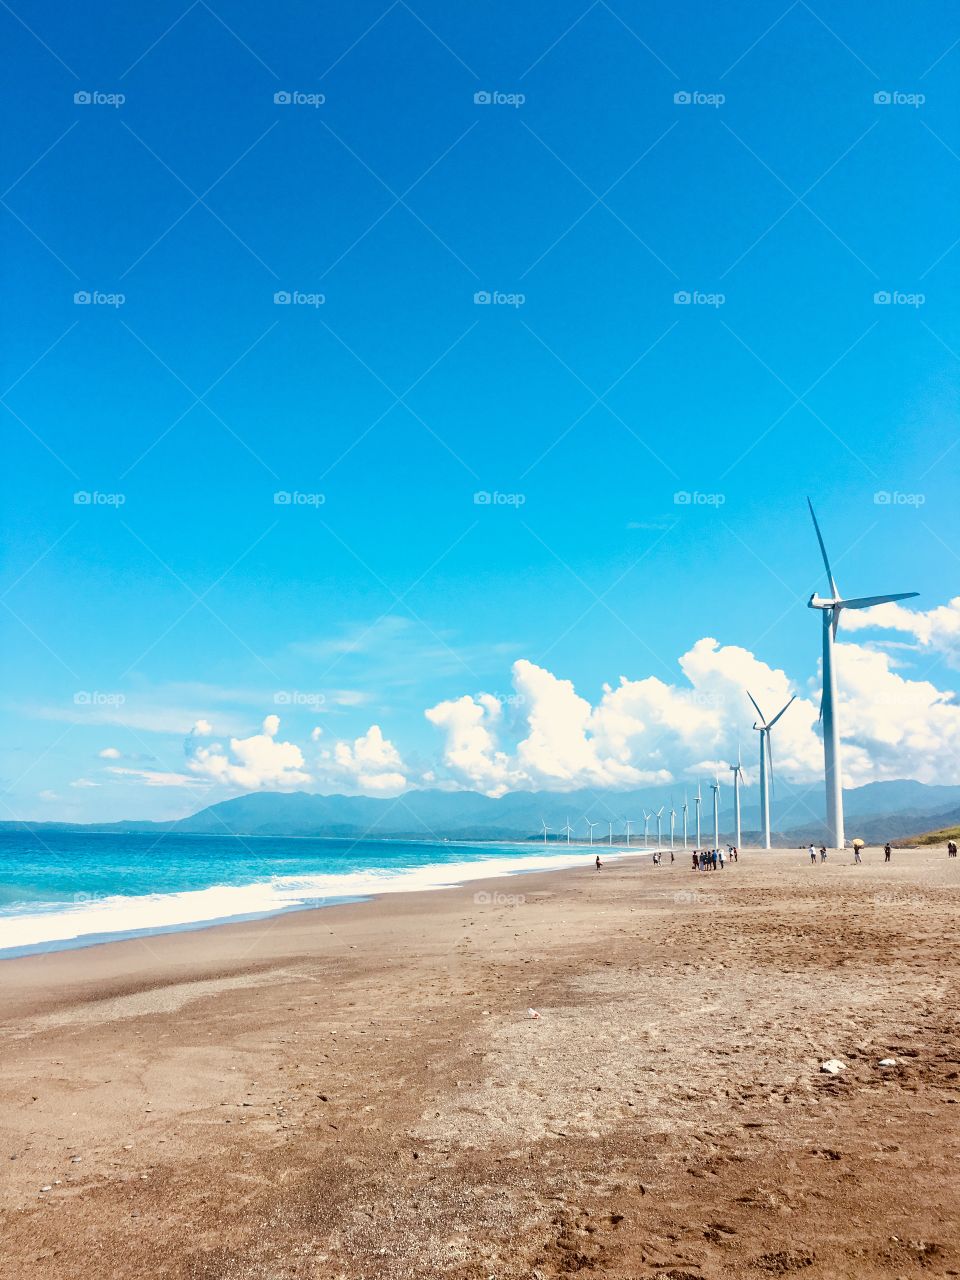 Massive Fan by the bay, can be visit at the province of Ilocos Norte at the Town of Bangui. These Massive wind mills provides the supply of electricity in the whole province.


